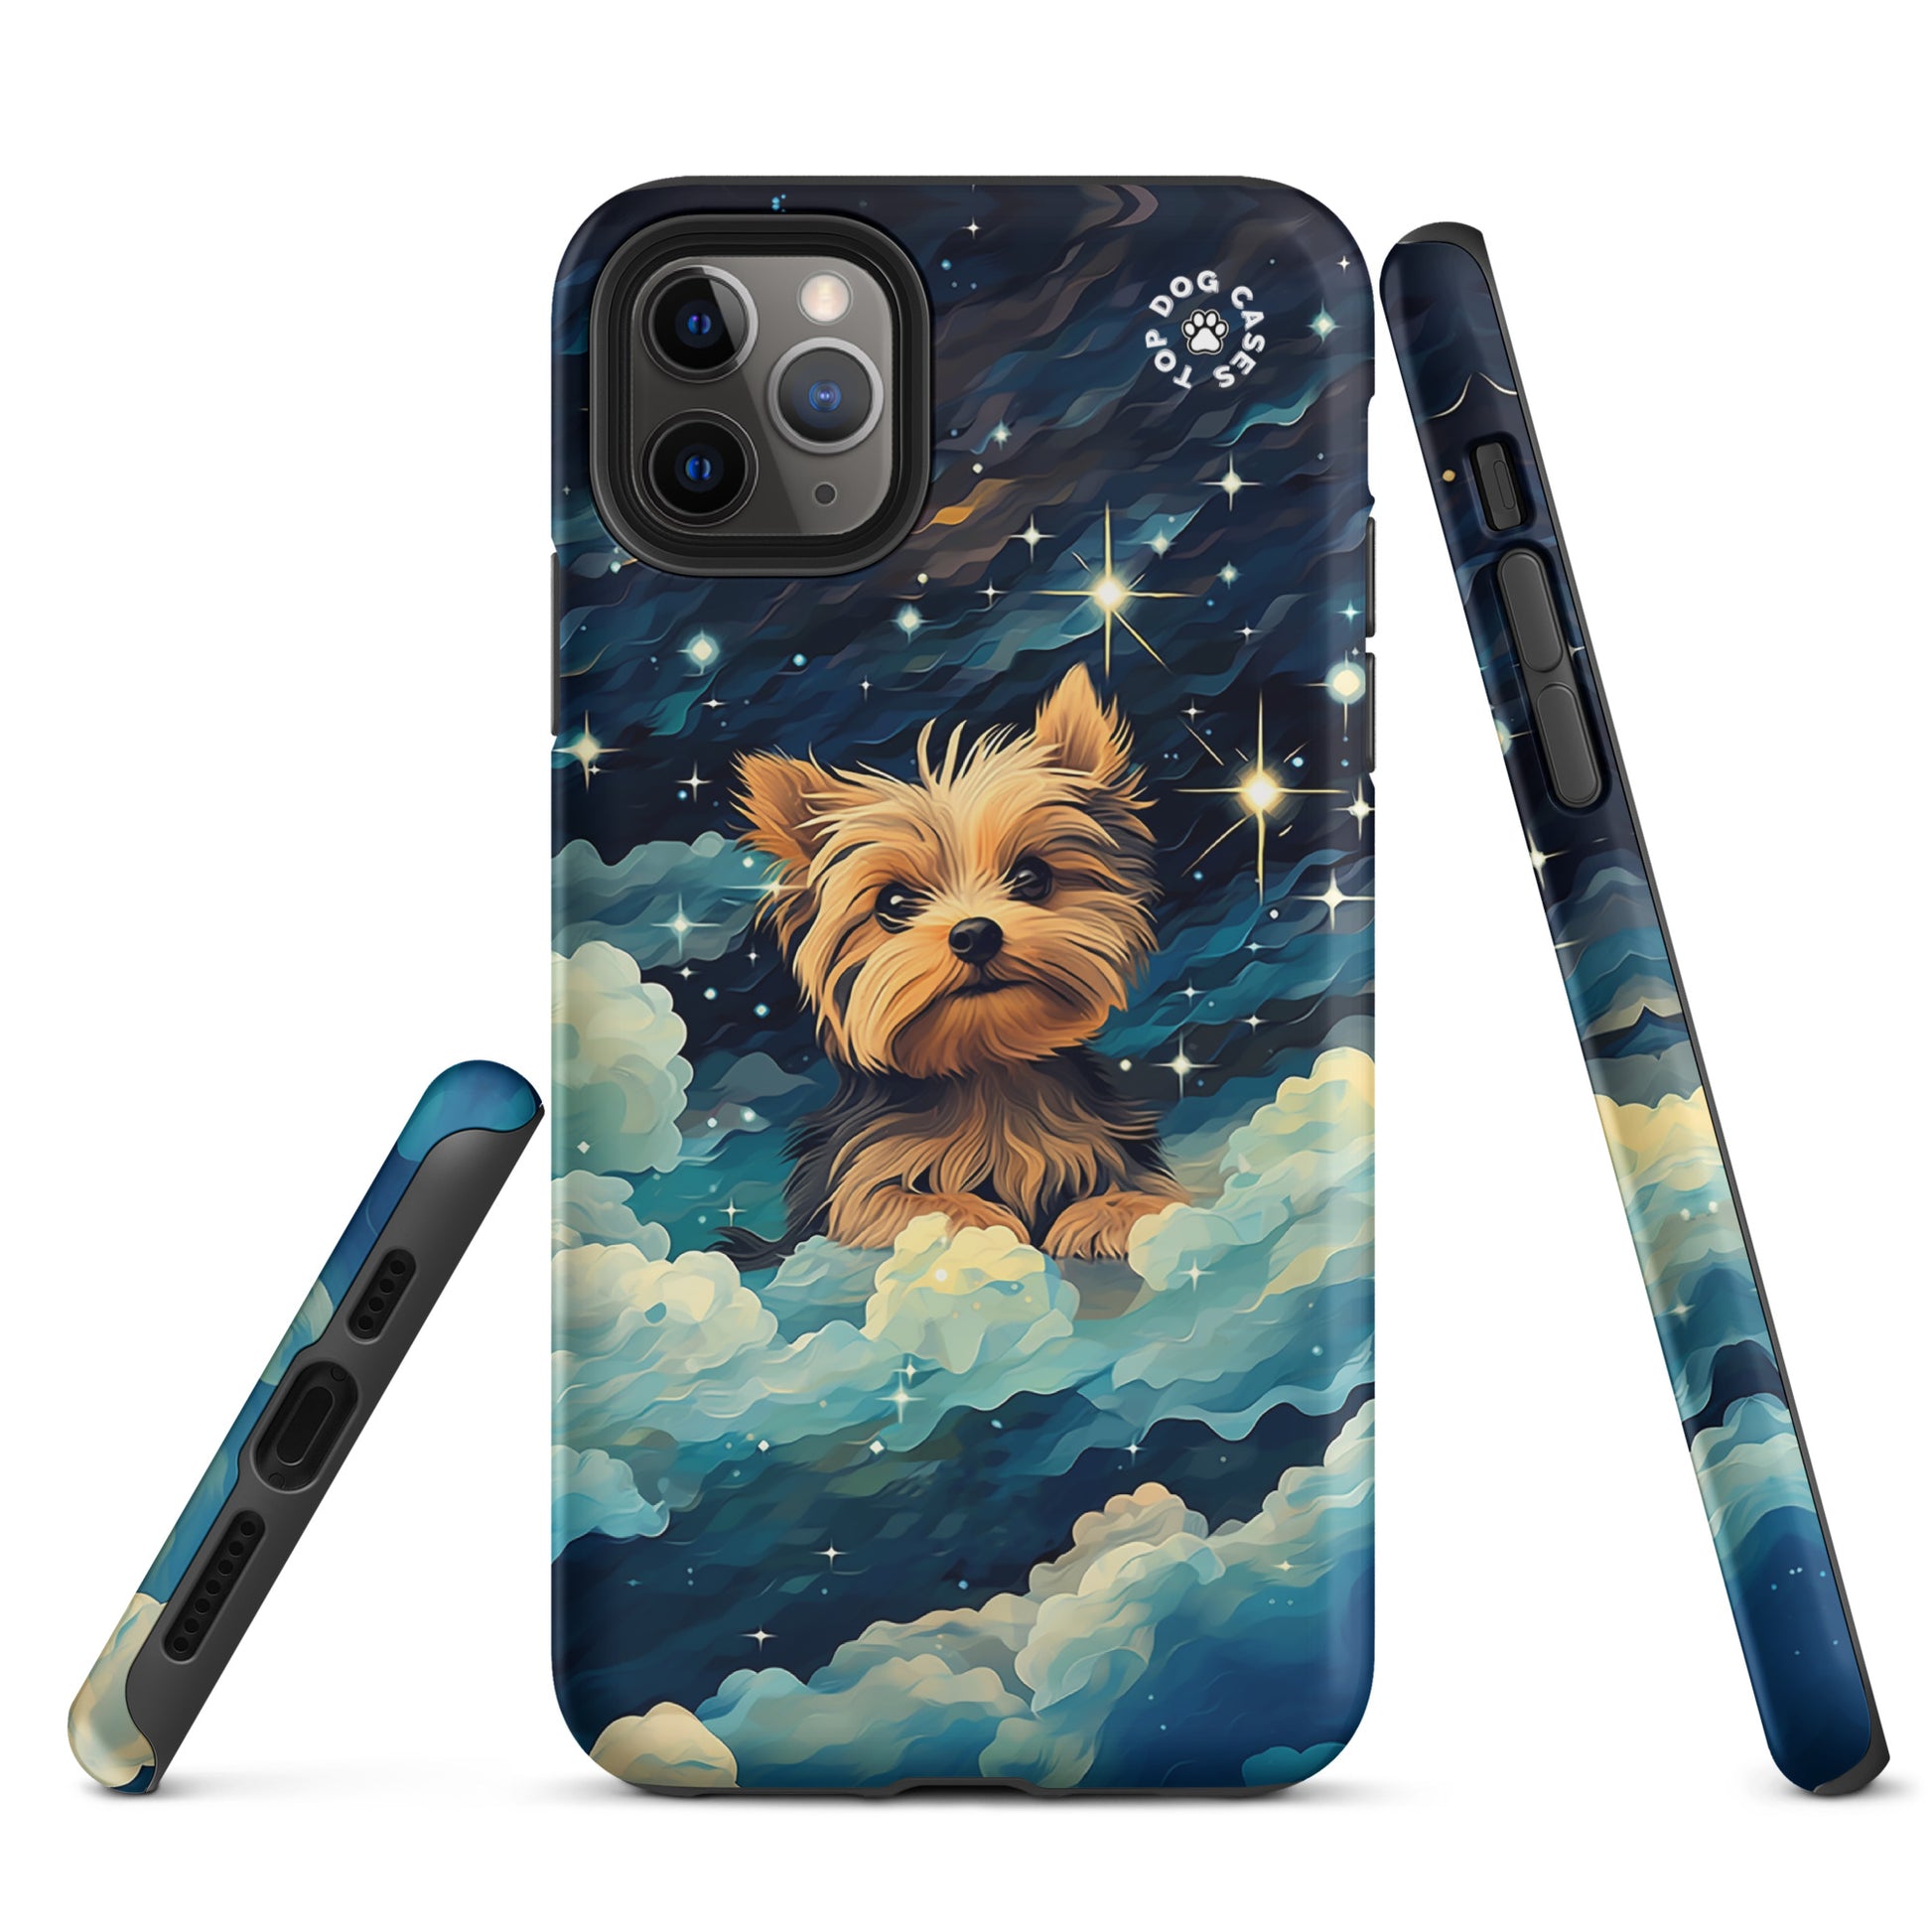 Cute iPhone Cases Yorkie - Top Dog Cases - #CuteDog, #CuteDogs, #DogPhoneCase, #dogs, #iPhone, #iPhone11, #iphone11case, #iPhone12, #iPhone12case, #iPhone13, #iPhone13case, #iPhone13DogCase, #iPhone13Mini, #iPhone13Pro, #iPhone13ProMax, #iPhone14, #iPhone14case, #iPhone14DogCase, #iPhone14Plus, #iPhone14Pluscase, #iPhone14Pro, #iPhone14ProMax, #iPhone14ProMaxCase, #iPhone15, #iPhone15case, #iPhonecase, #iphonedogcase, #Yorkie